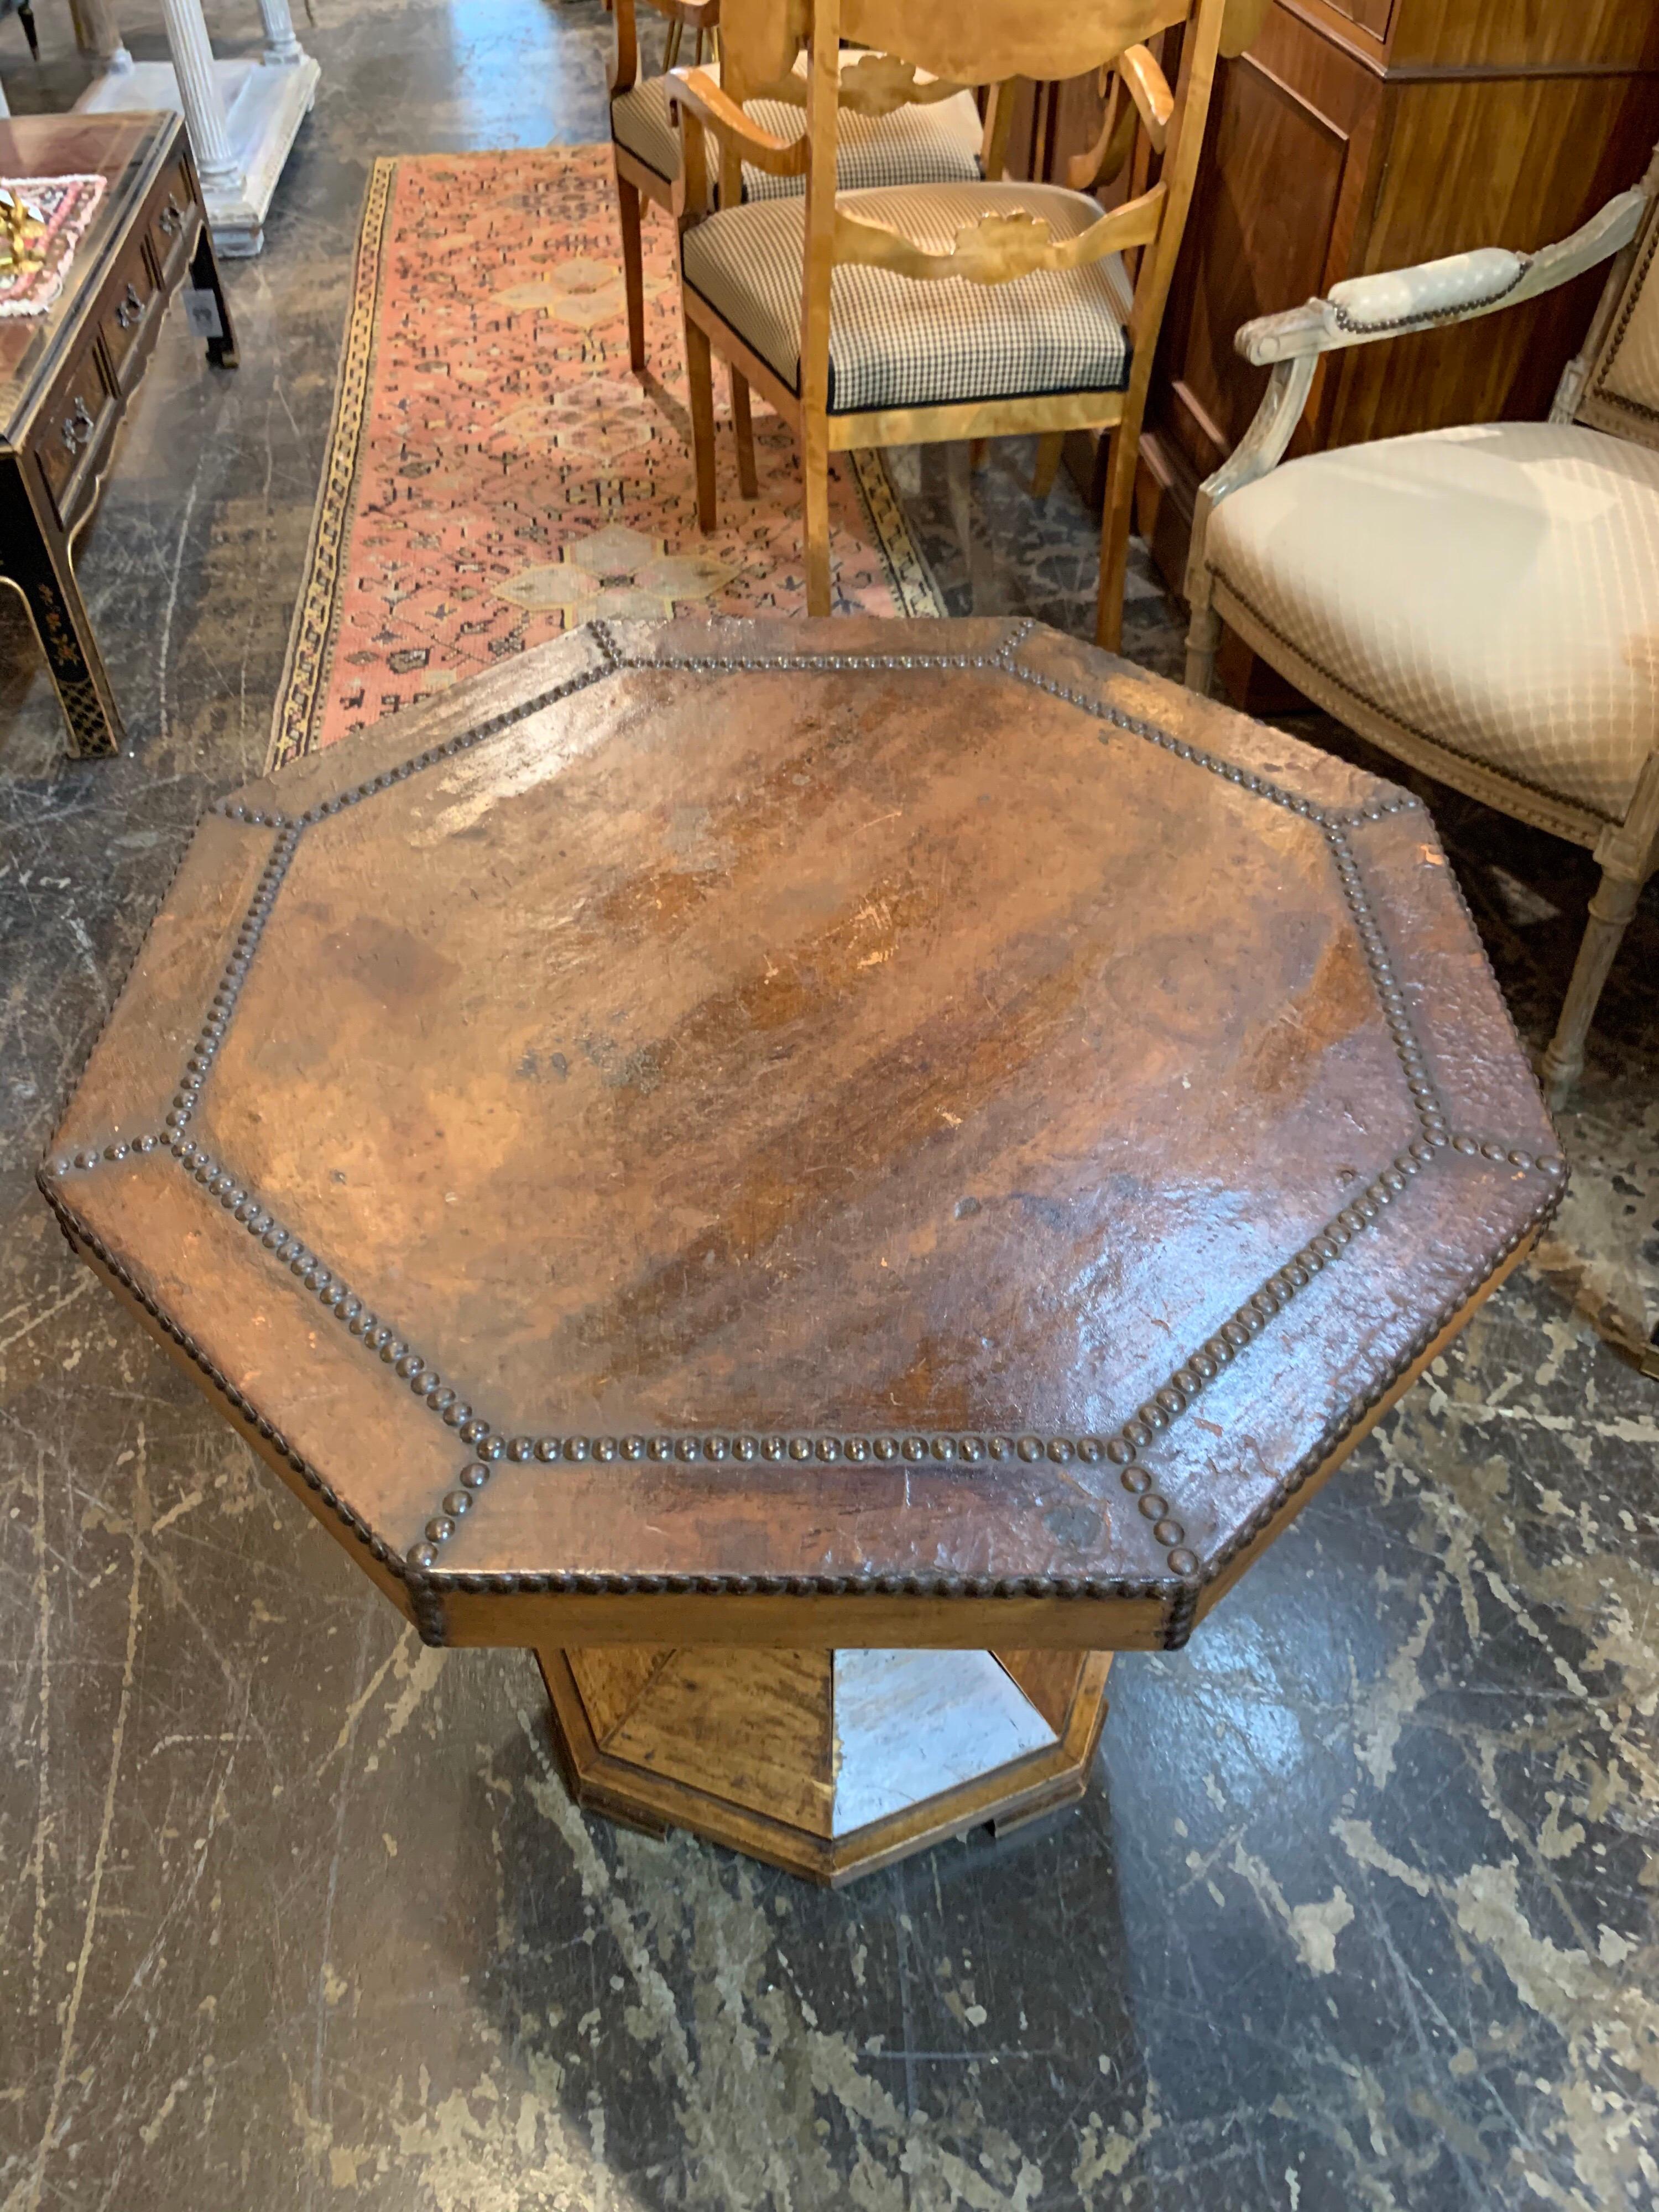 Very handsome table with carved base. The top of the table is leather with nailheads. Would be great in a study or library. So pretty!